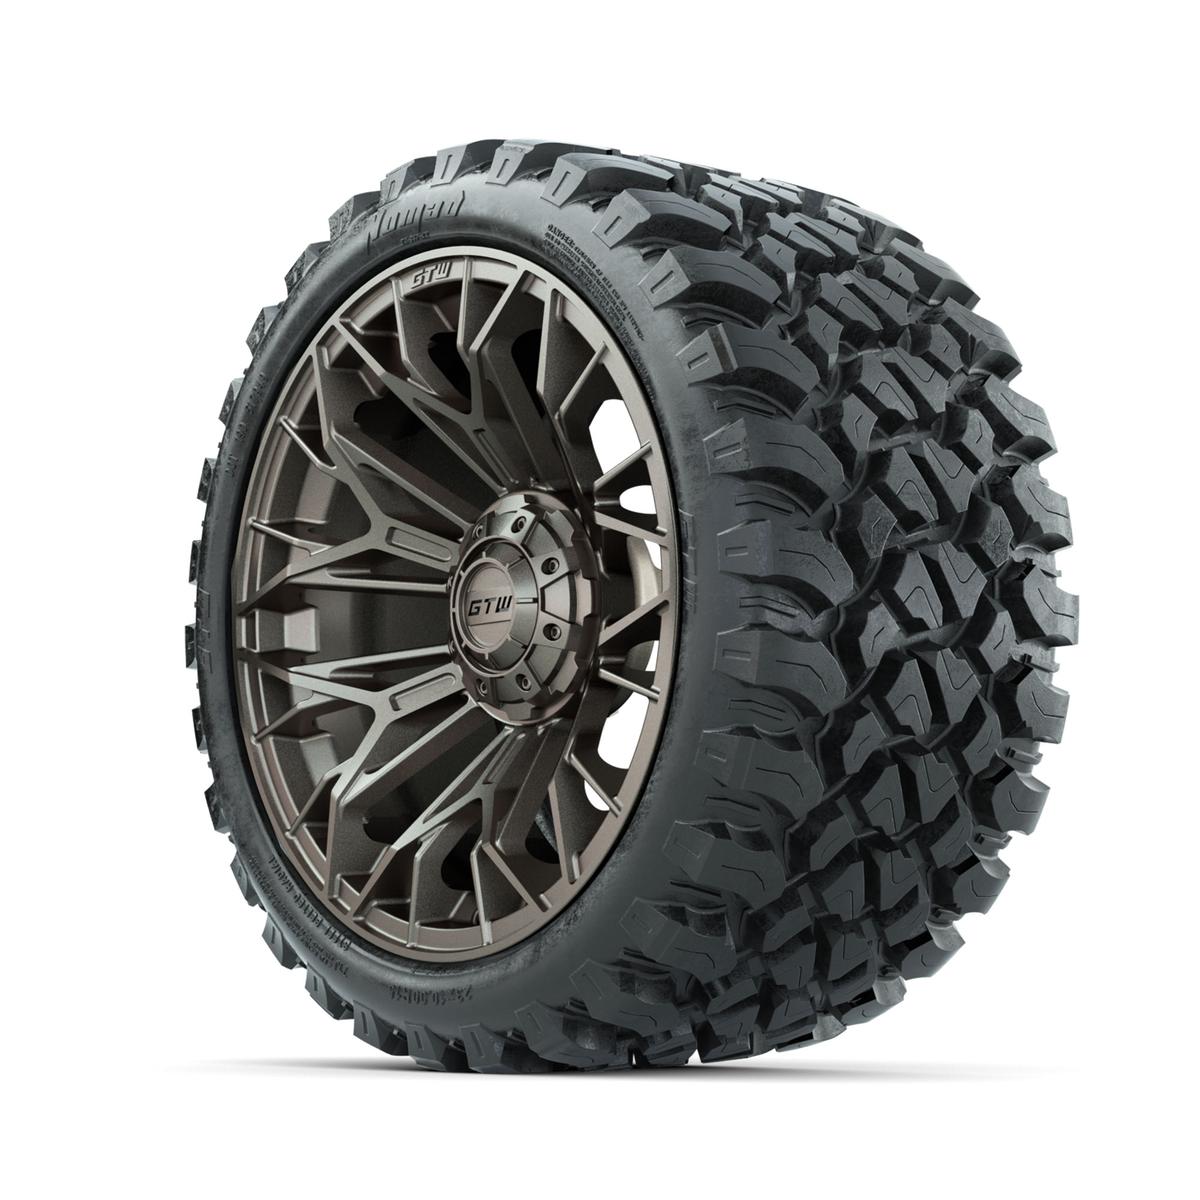 Set of (4) 15 in GTW® Stellar Matte Bronze Wheels with 23x10-R15 Nomad All-Terrain Tires